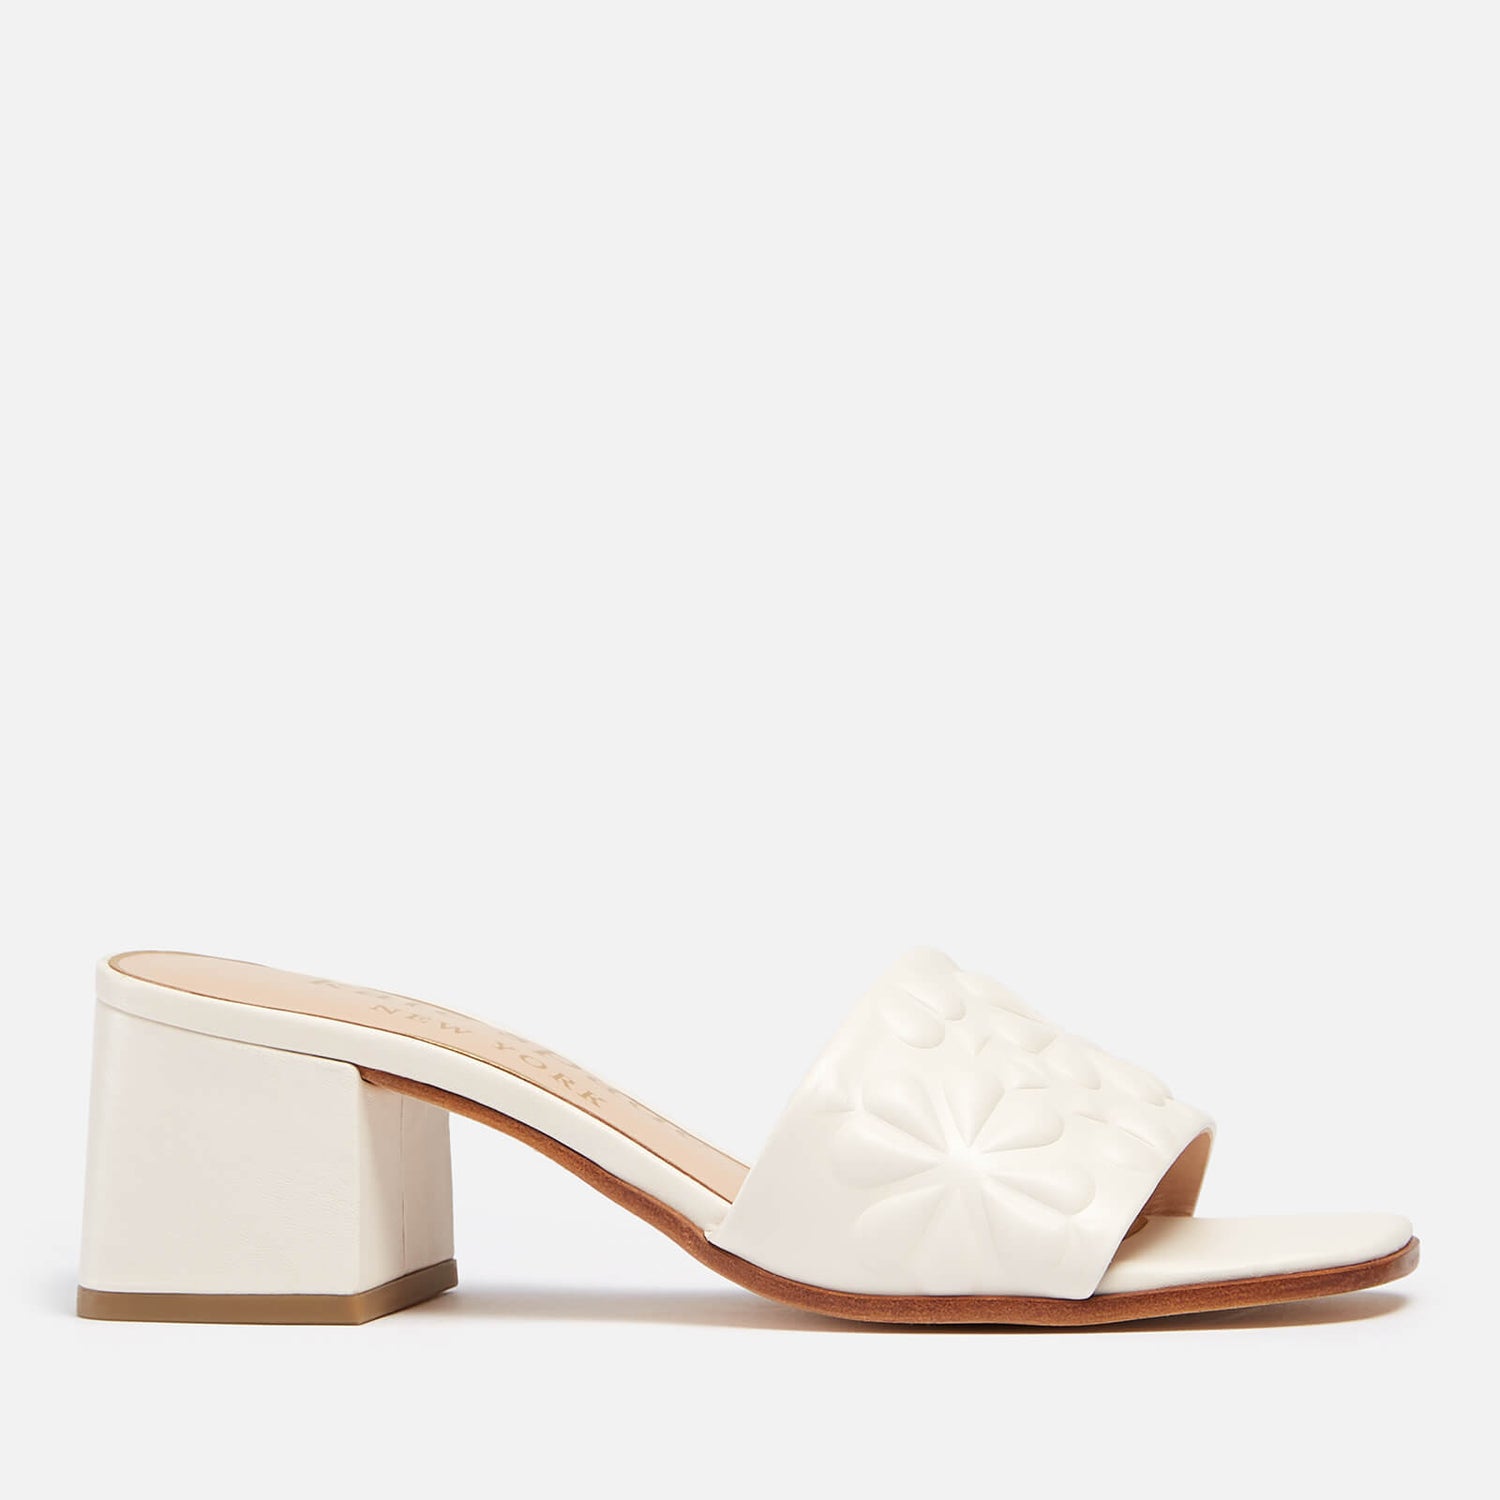 Kate Spade New York Women's Emmie Mid Leather Heeled Mules - Parchment - UK 3